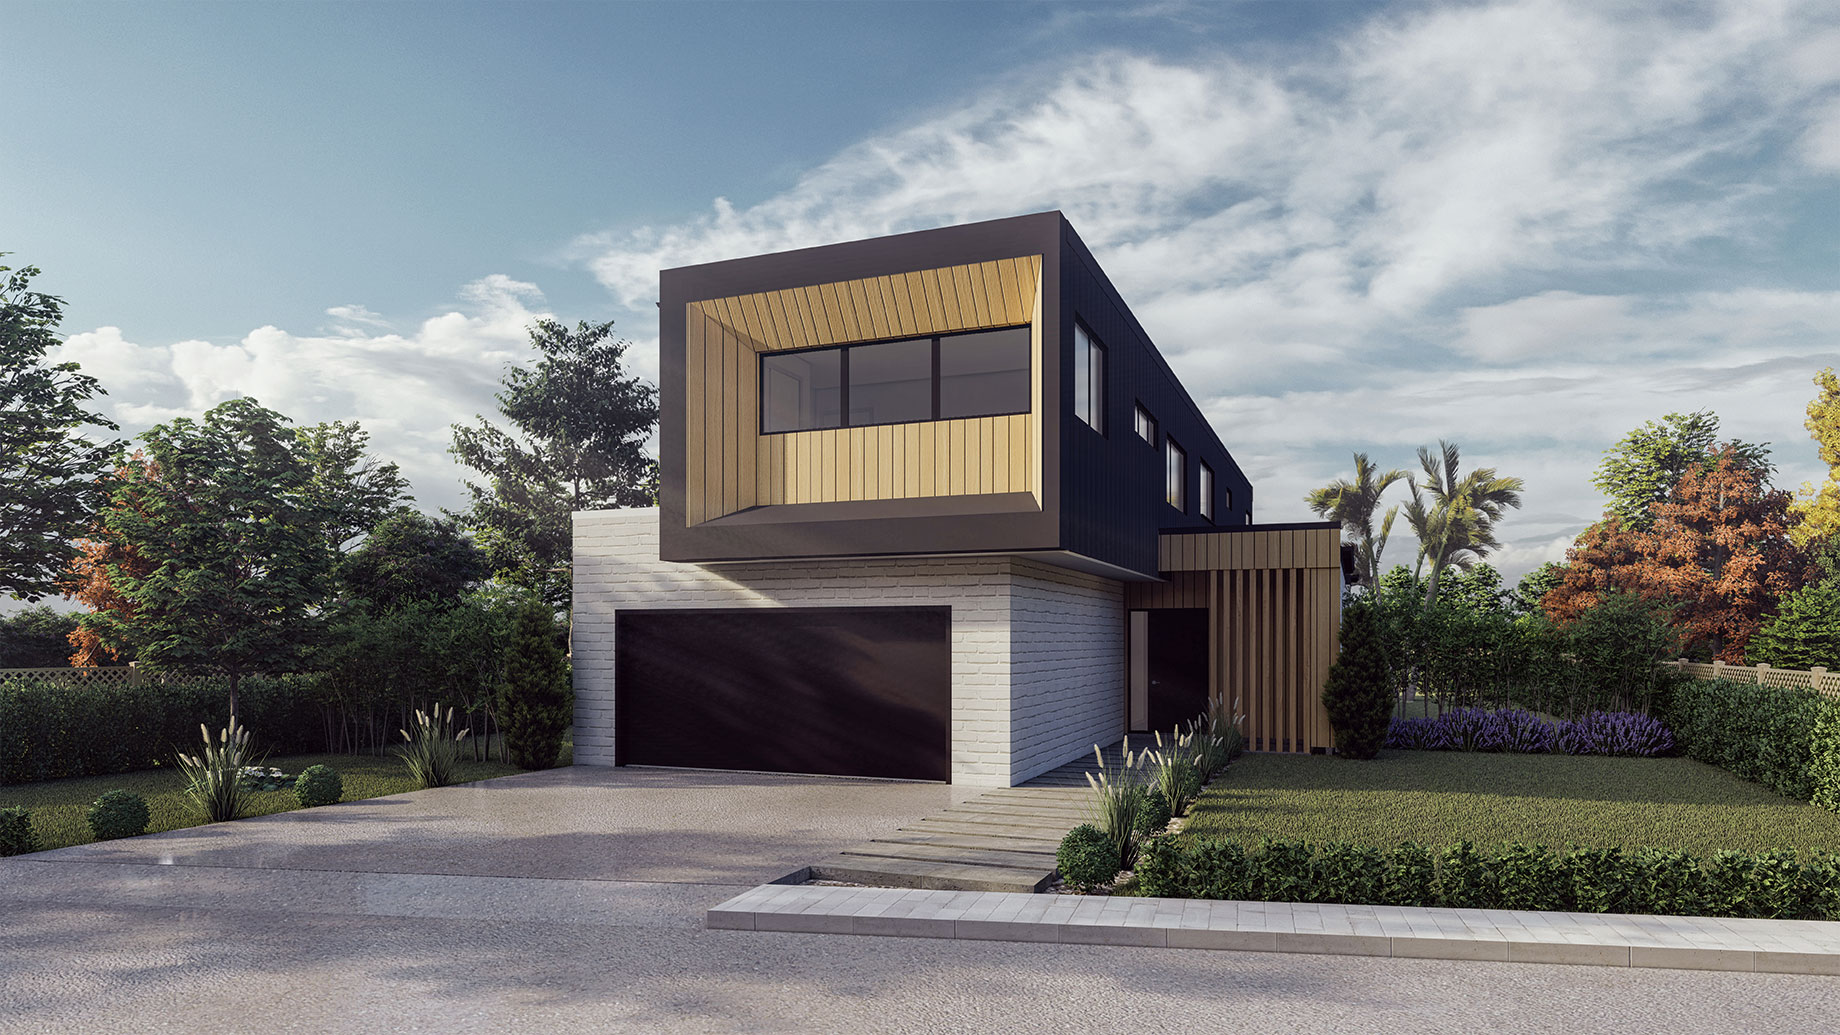 Two storey house render in daytime